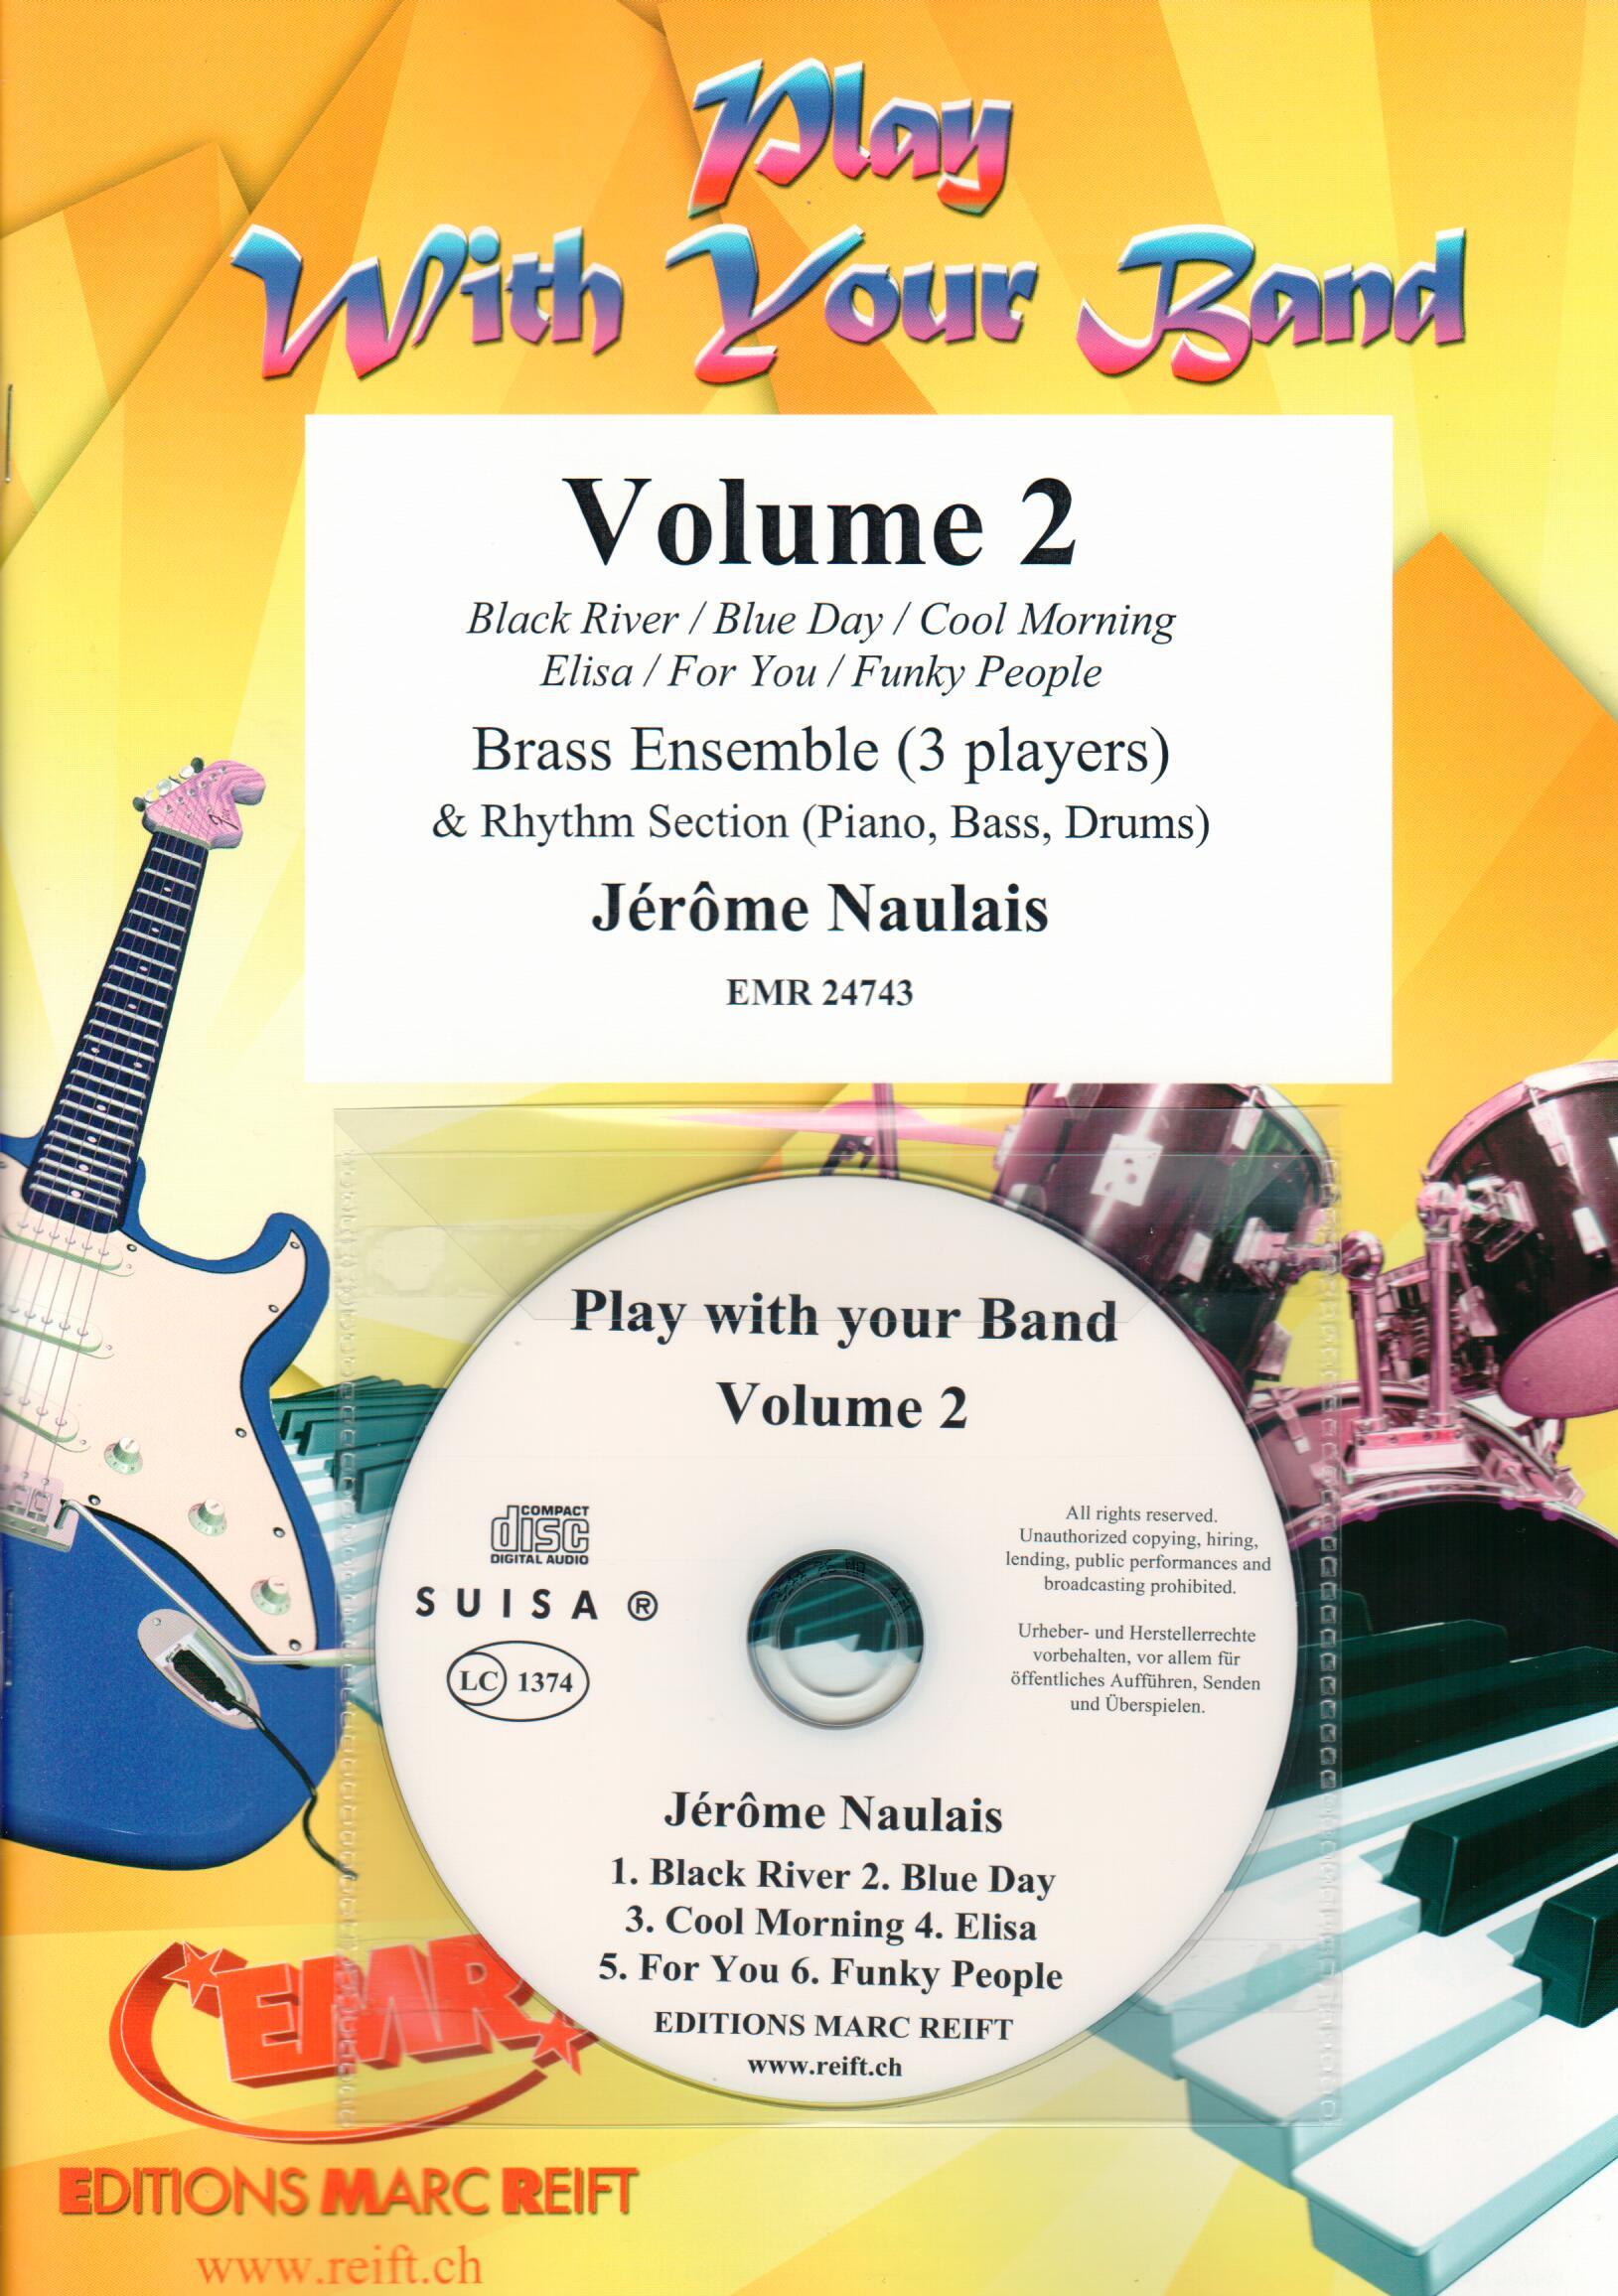 PLAY WITH YOUR BAND VOLUME 2, Trios